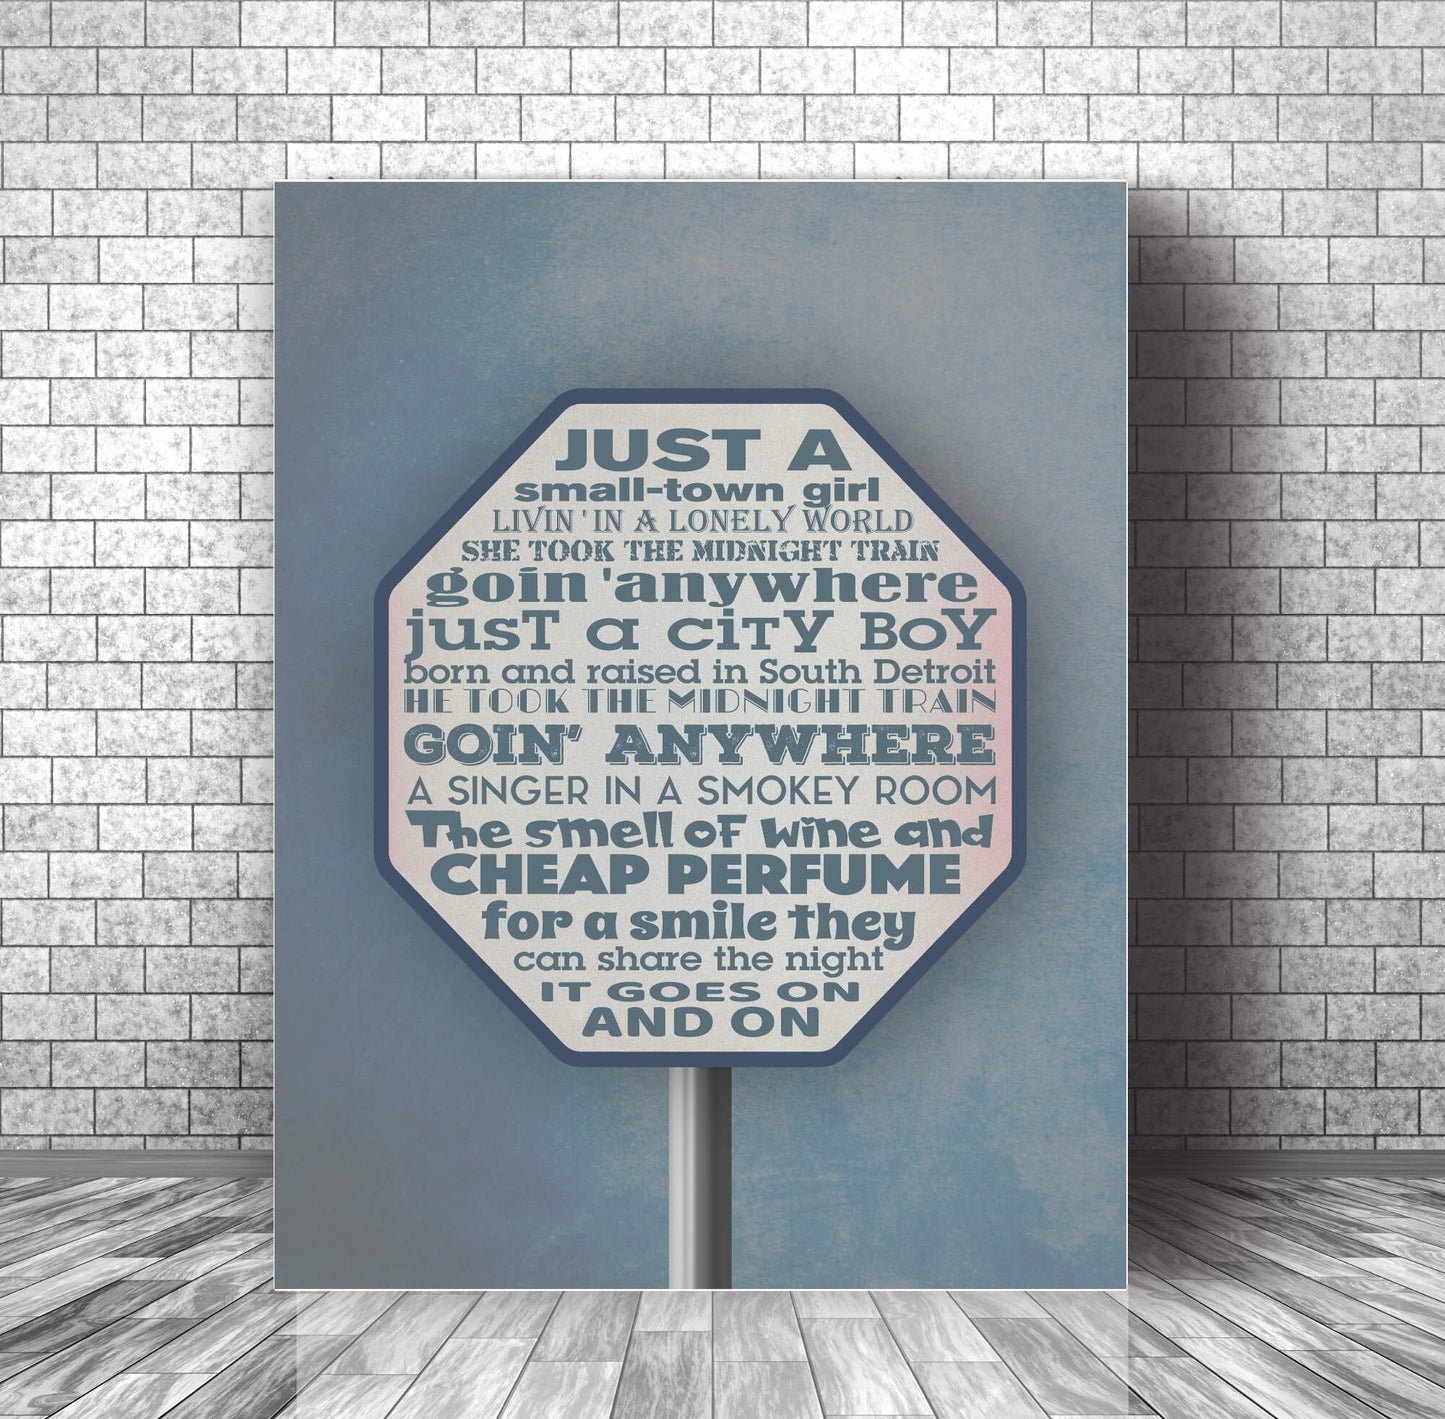 Don't Stop Believin' by Journey - Love Song Ballad Lyric Art Song Lyrics Art Song Lyrics Art 11x14 Canvas Wrap 